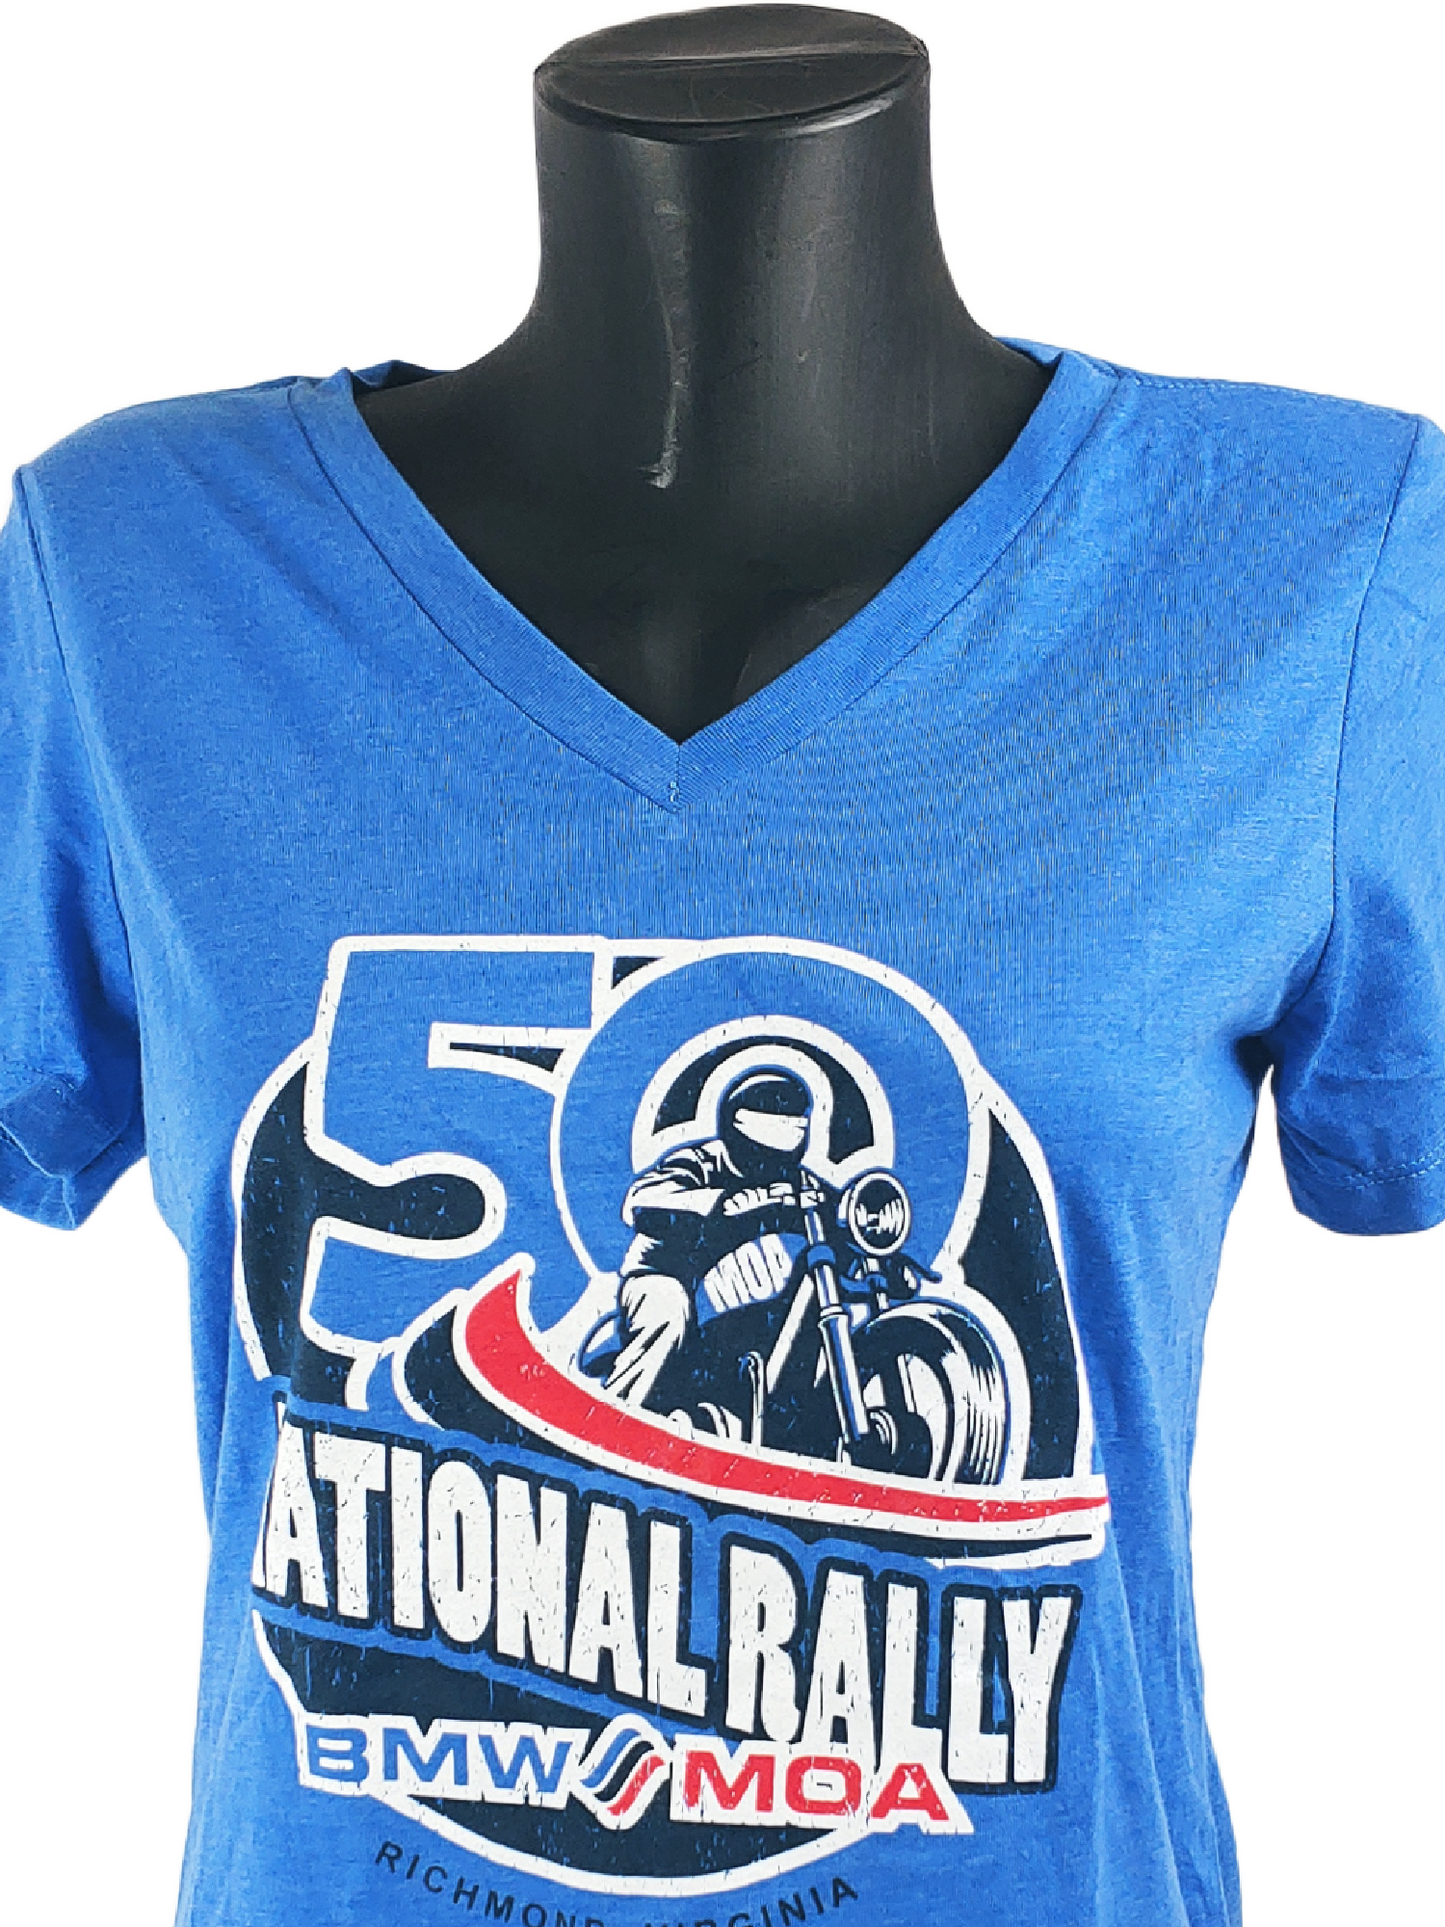 50th Anniversary National Rally - Women's V Neck or Regular Tee - Blue Heather